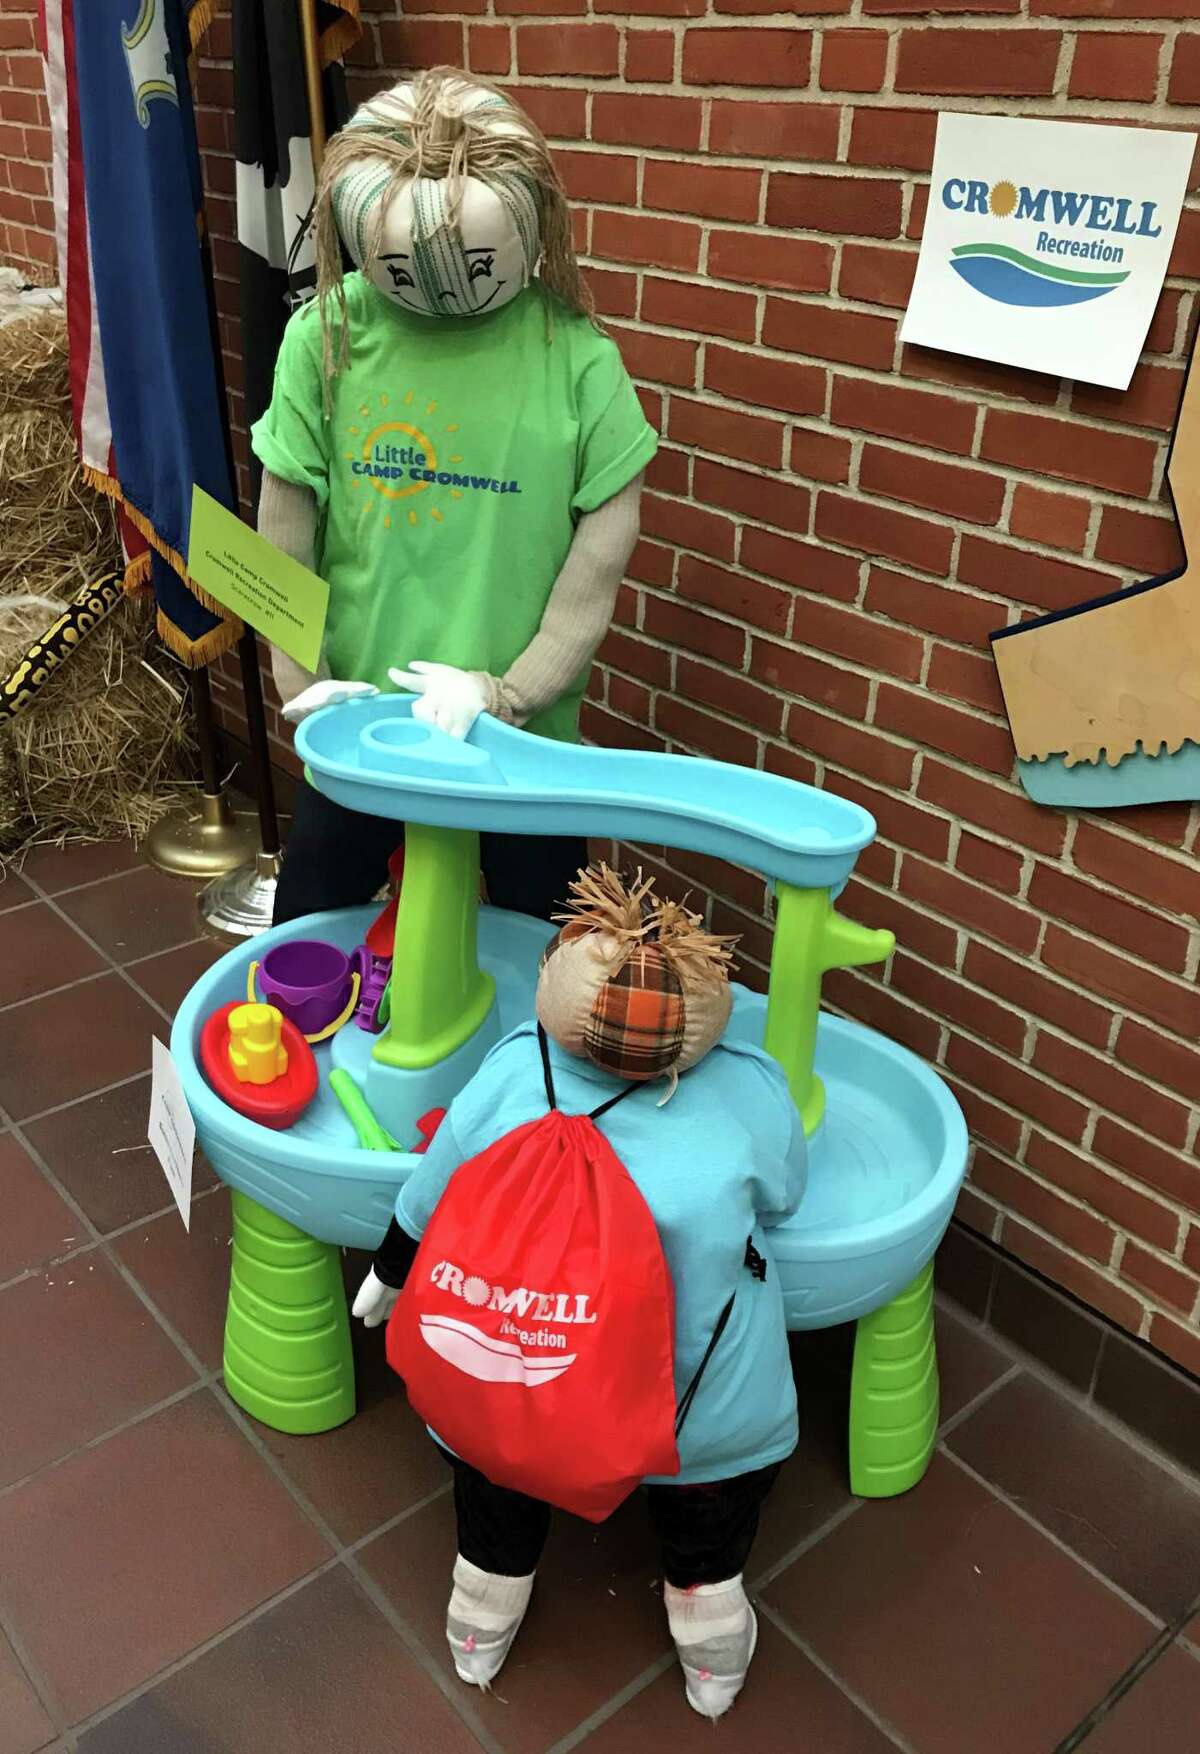 Cromwell will hold It’s second annual scarecrow contest, the brainchild of Senior Center Director Amy Saada. Little Camp Cromwell was created by the Recreation Department.